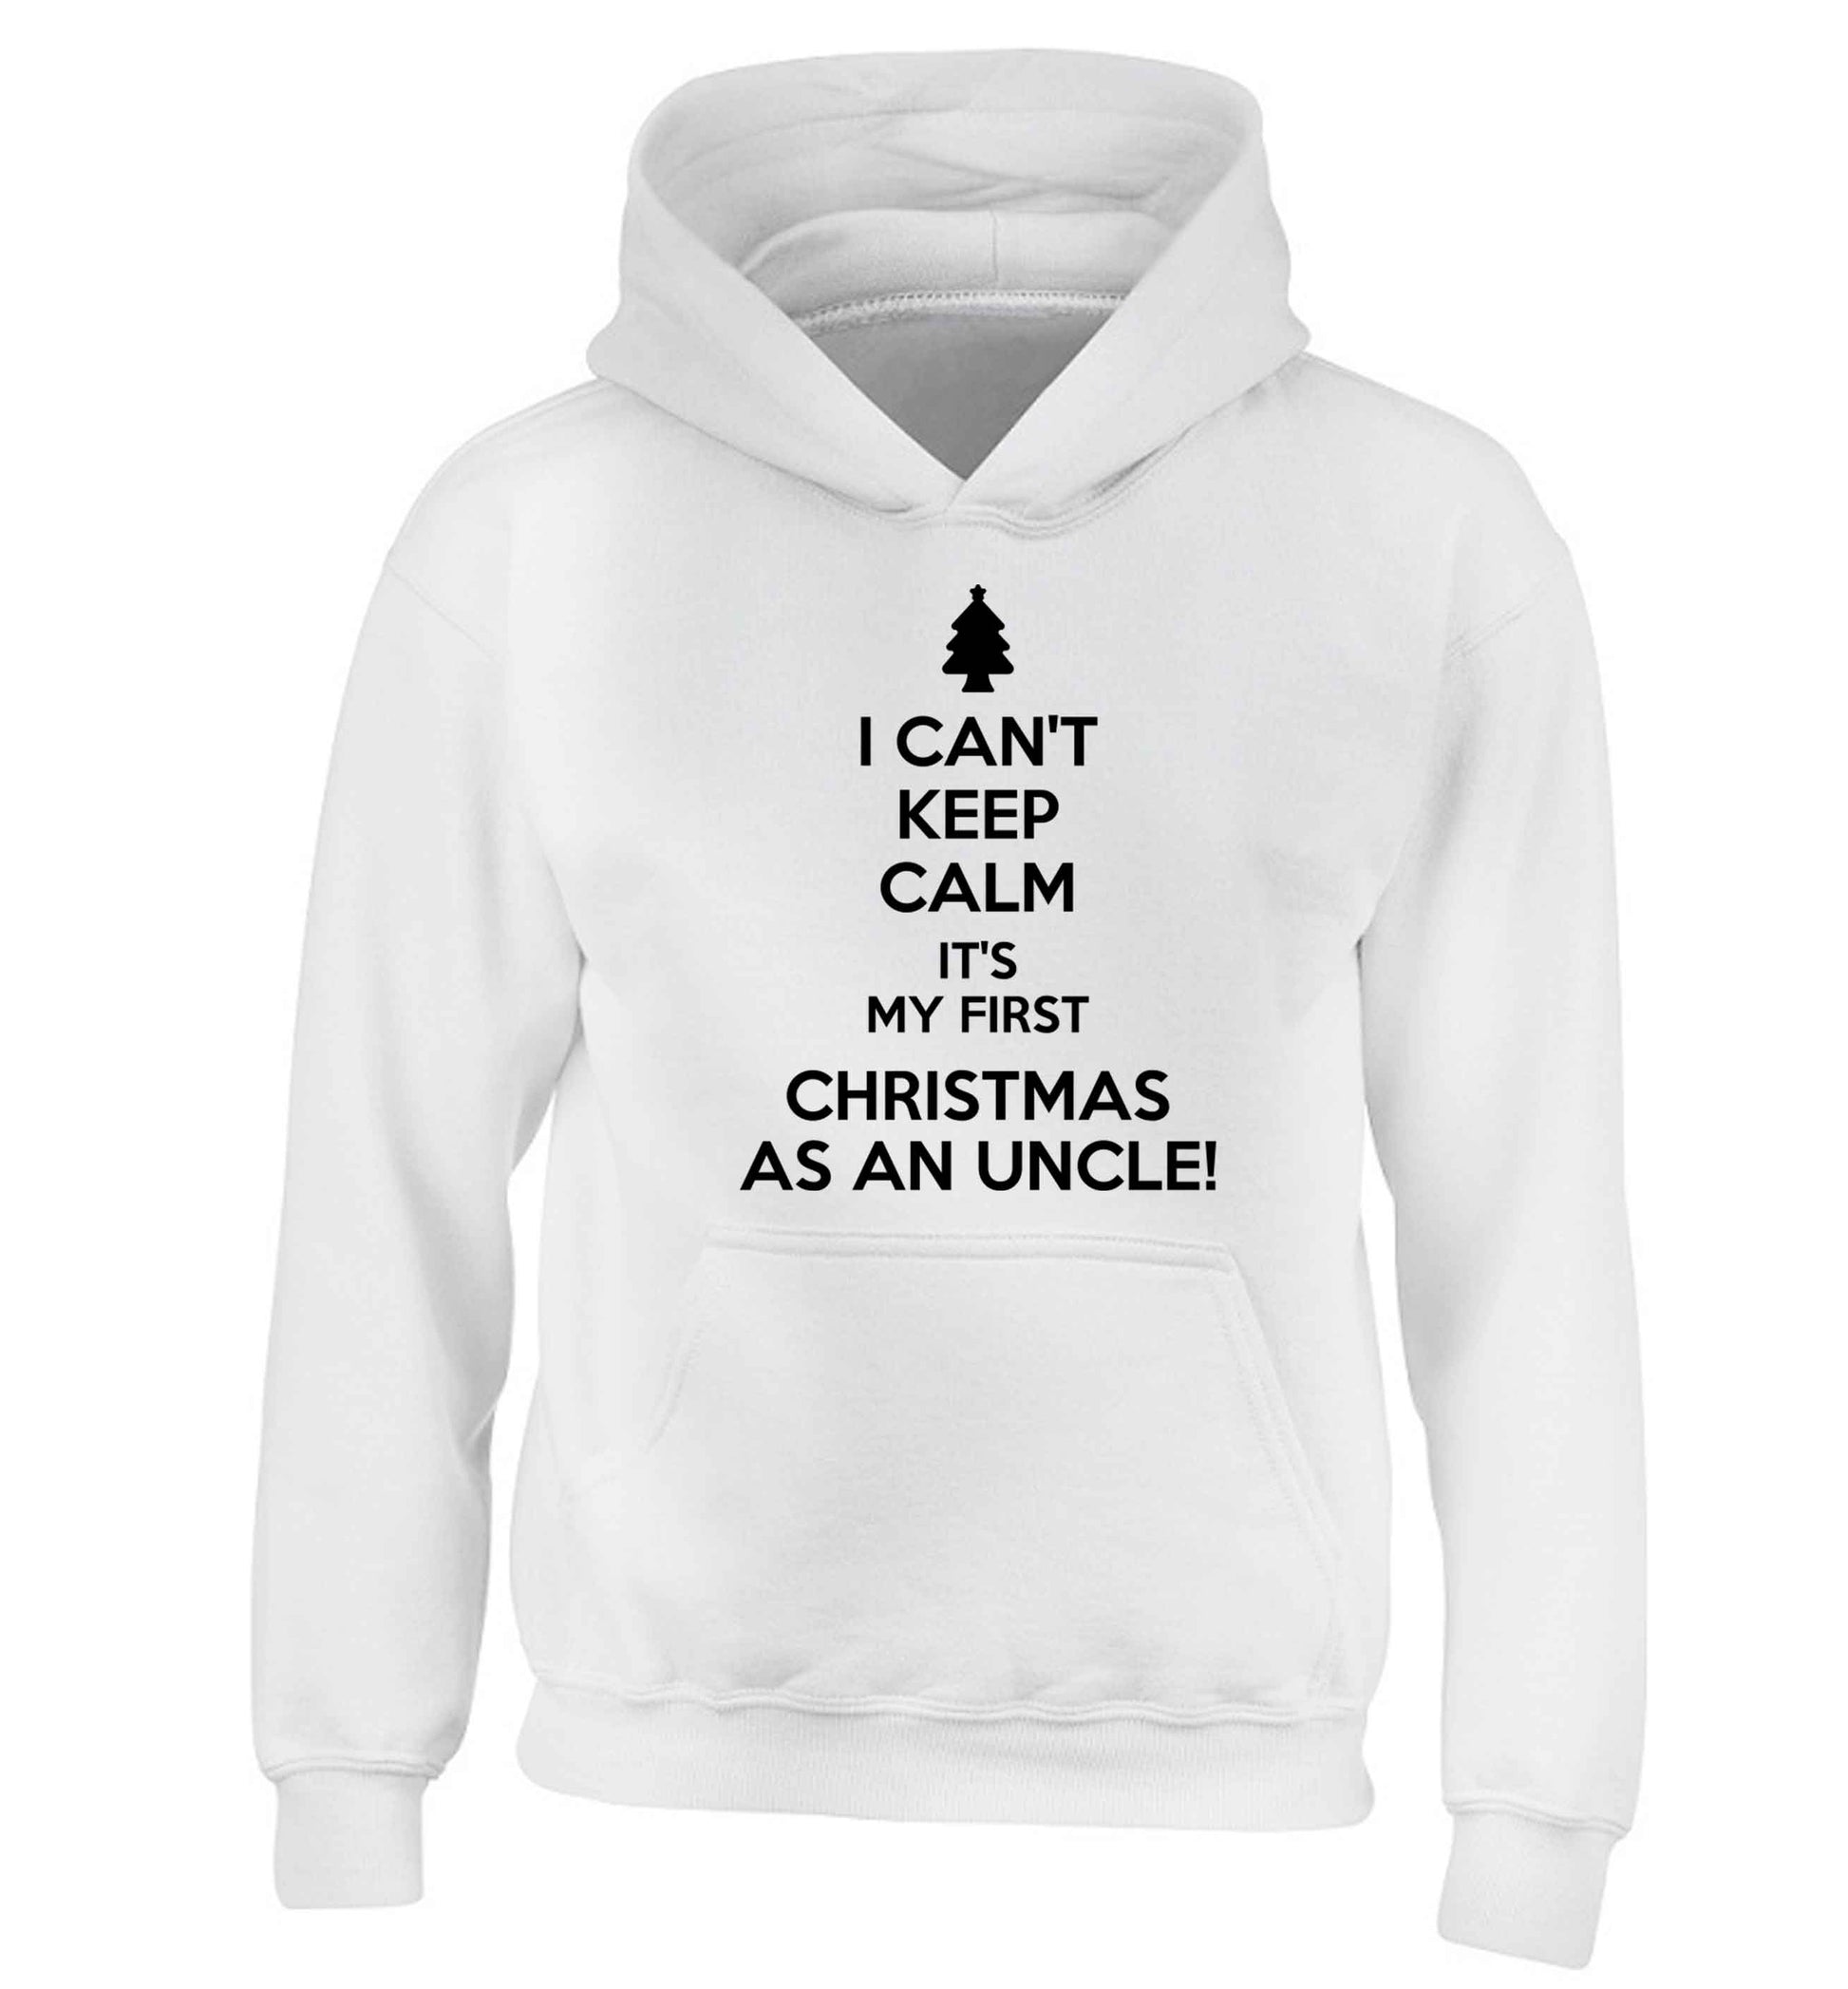 I can't keep calm it's my first Christmas as an uncle! children's white hoodie 12-13 Years